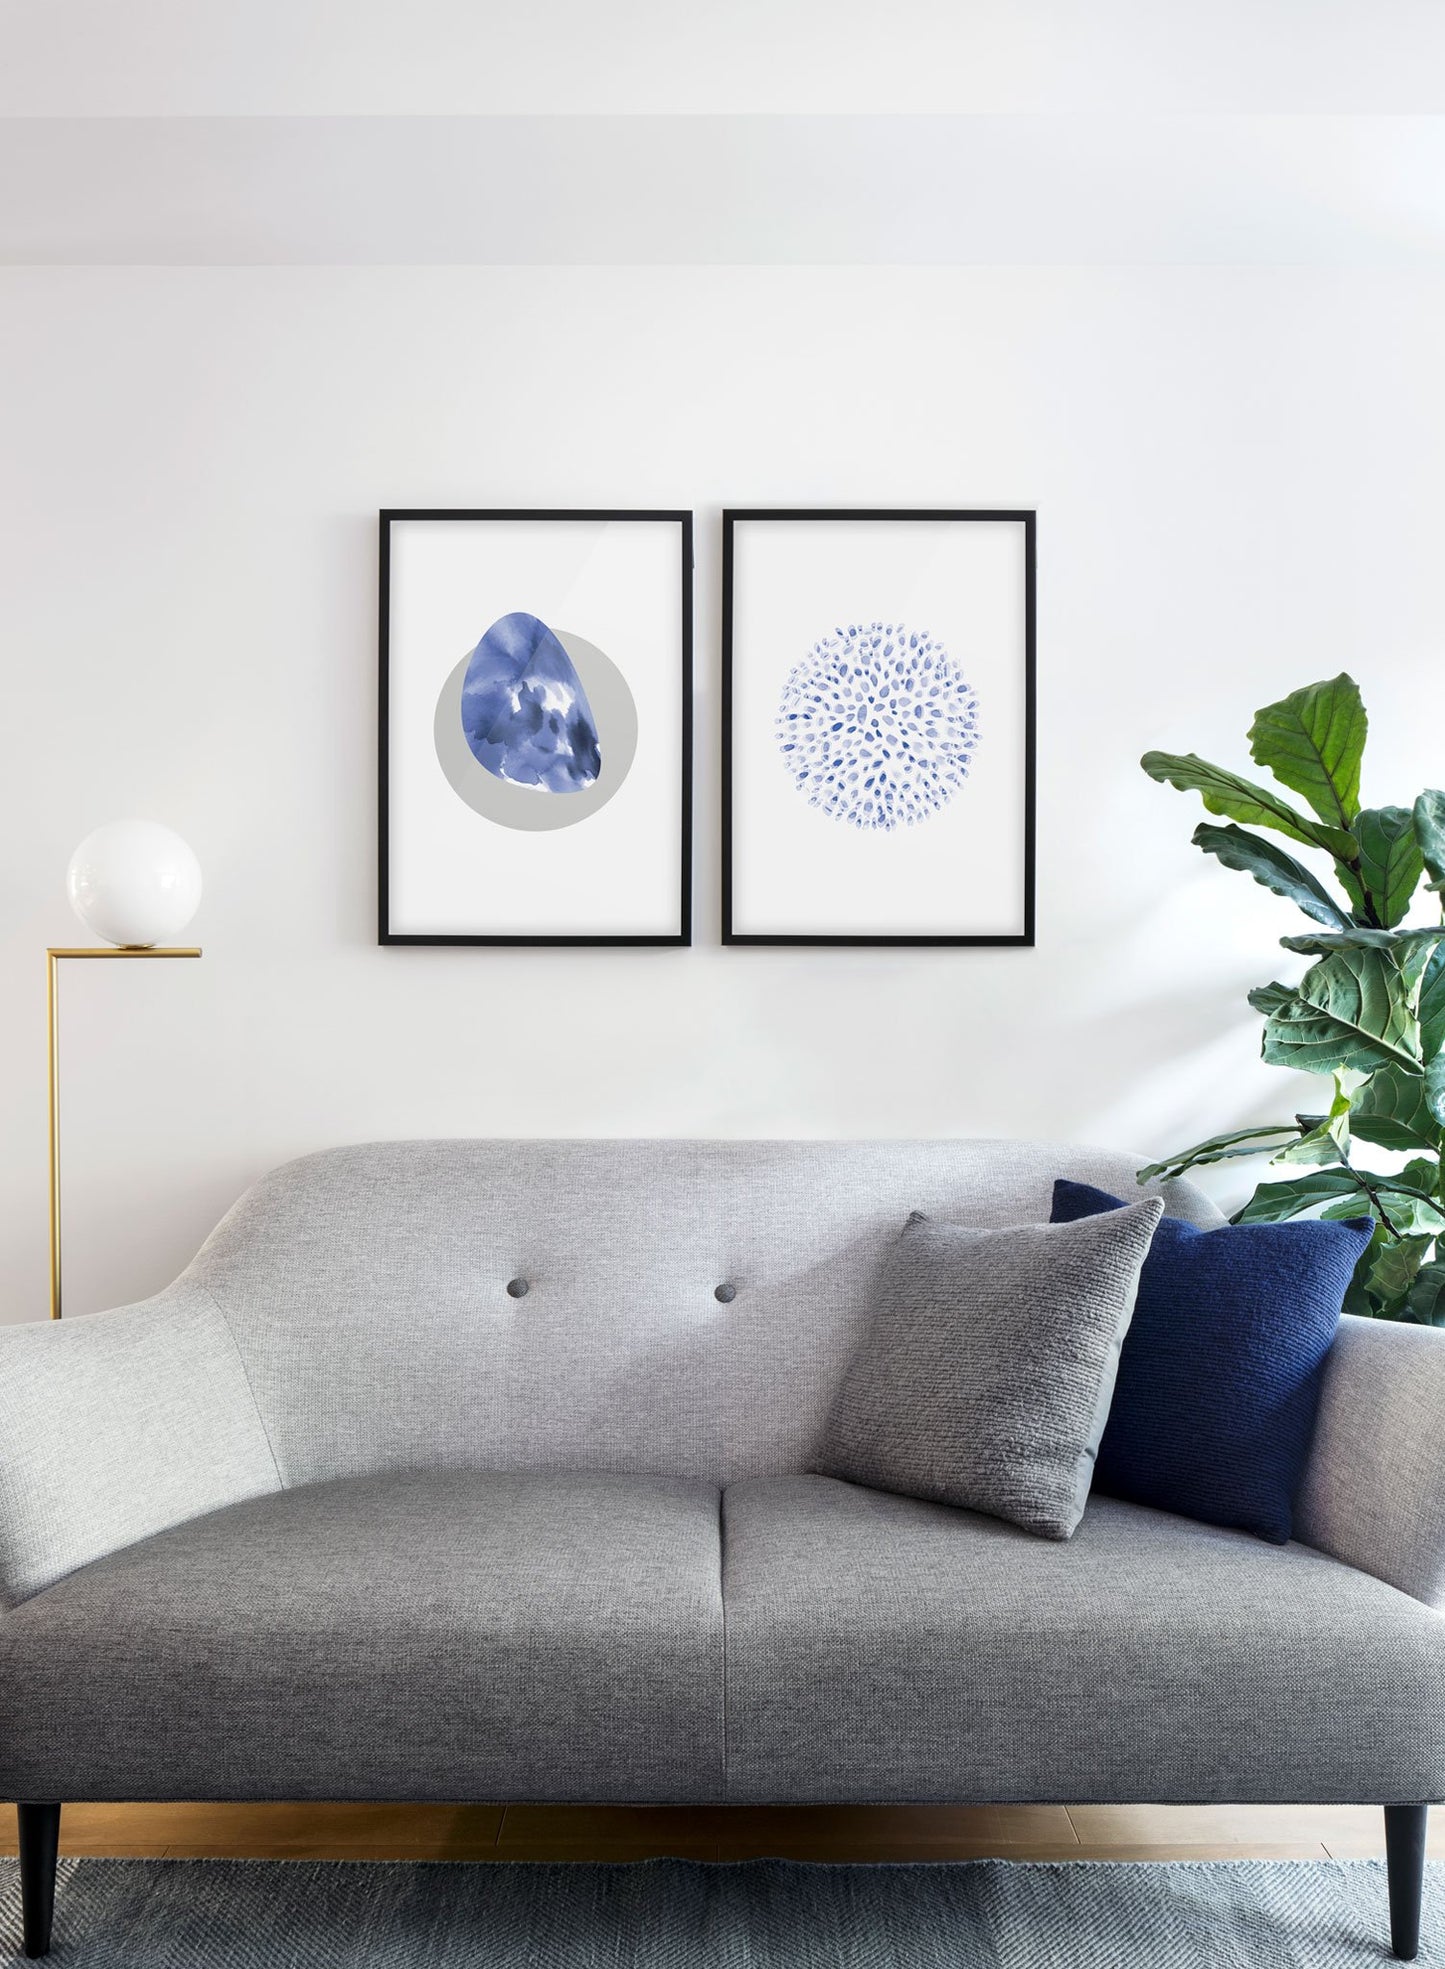 Modern minimalist poster by Opposite Wall with abstract illustration of Blue Dreams and fade into night - living room